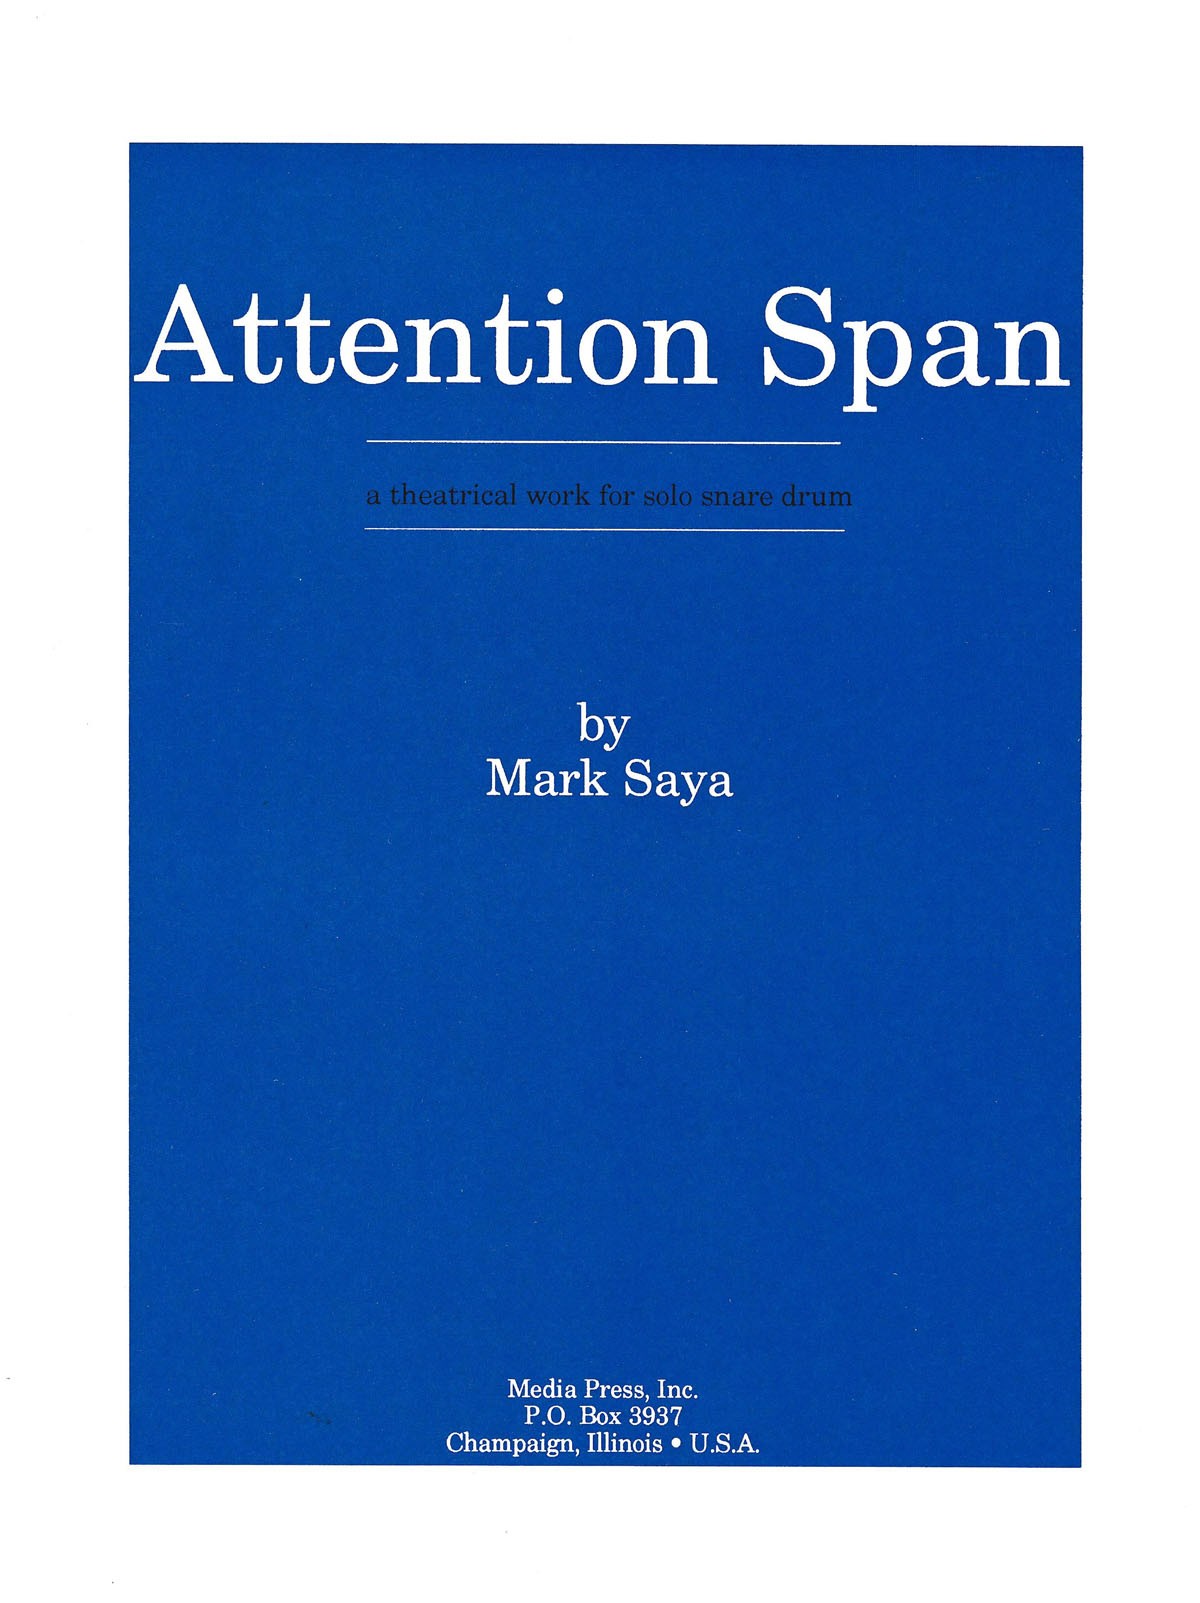 Attention Span by Mark Saya